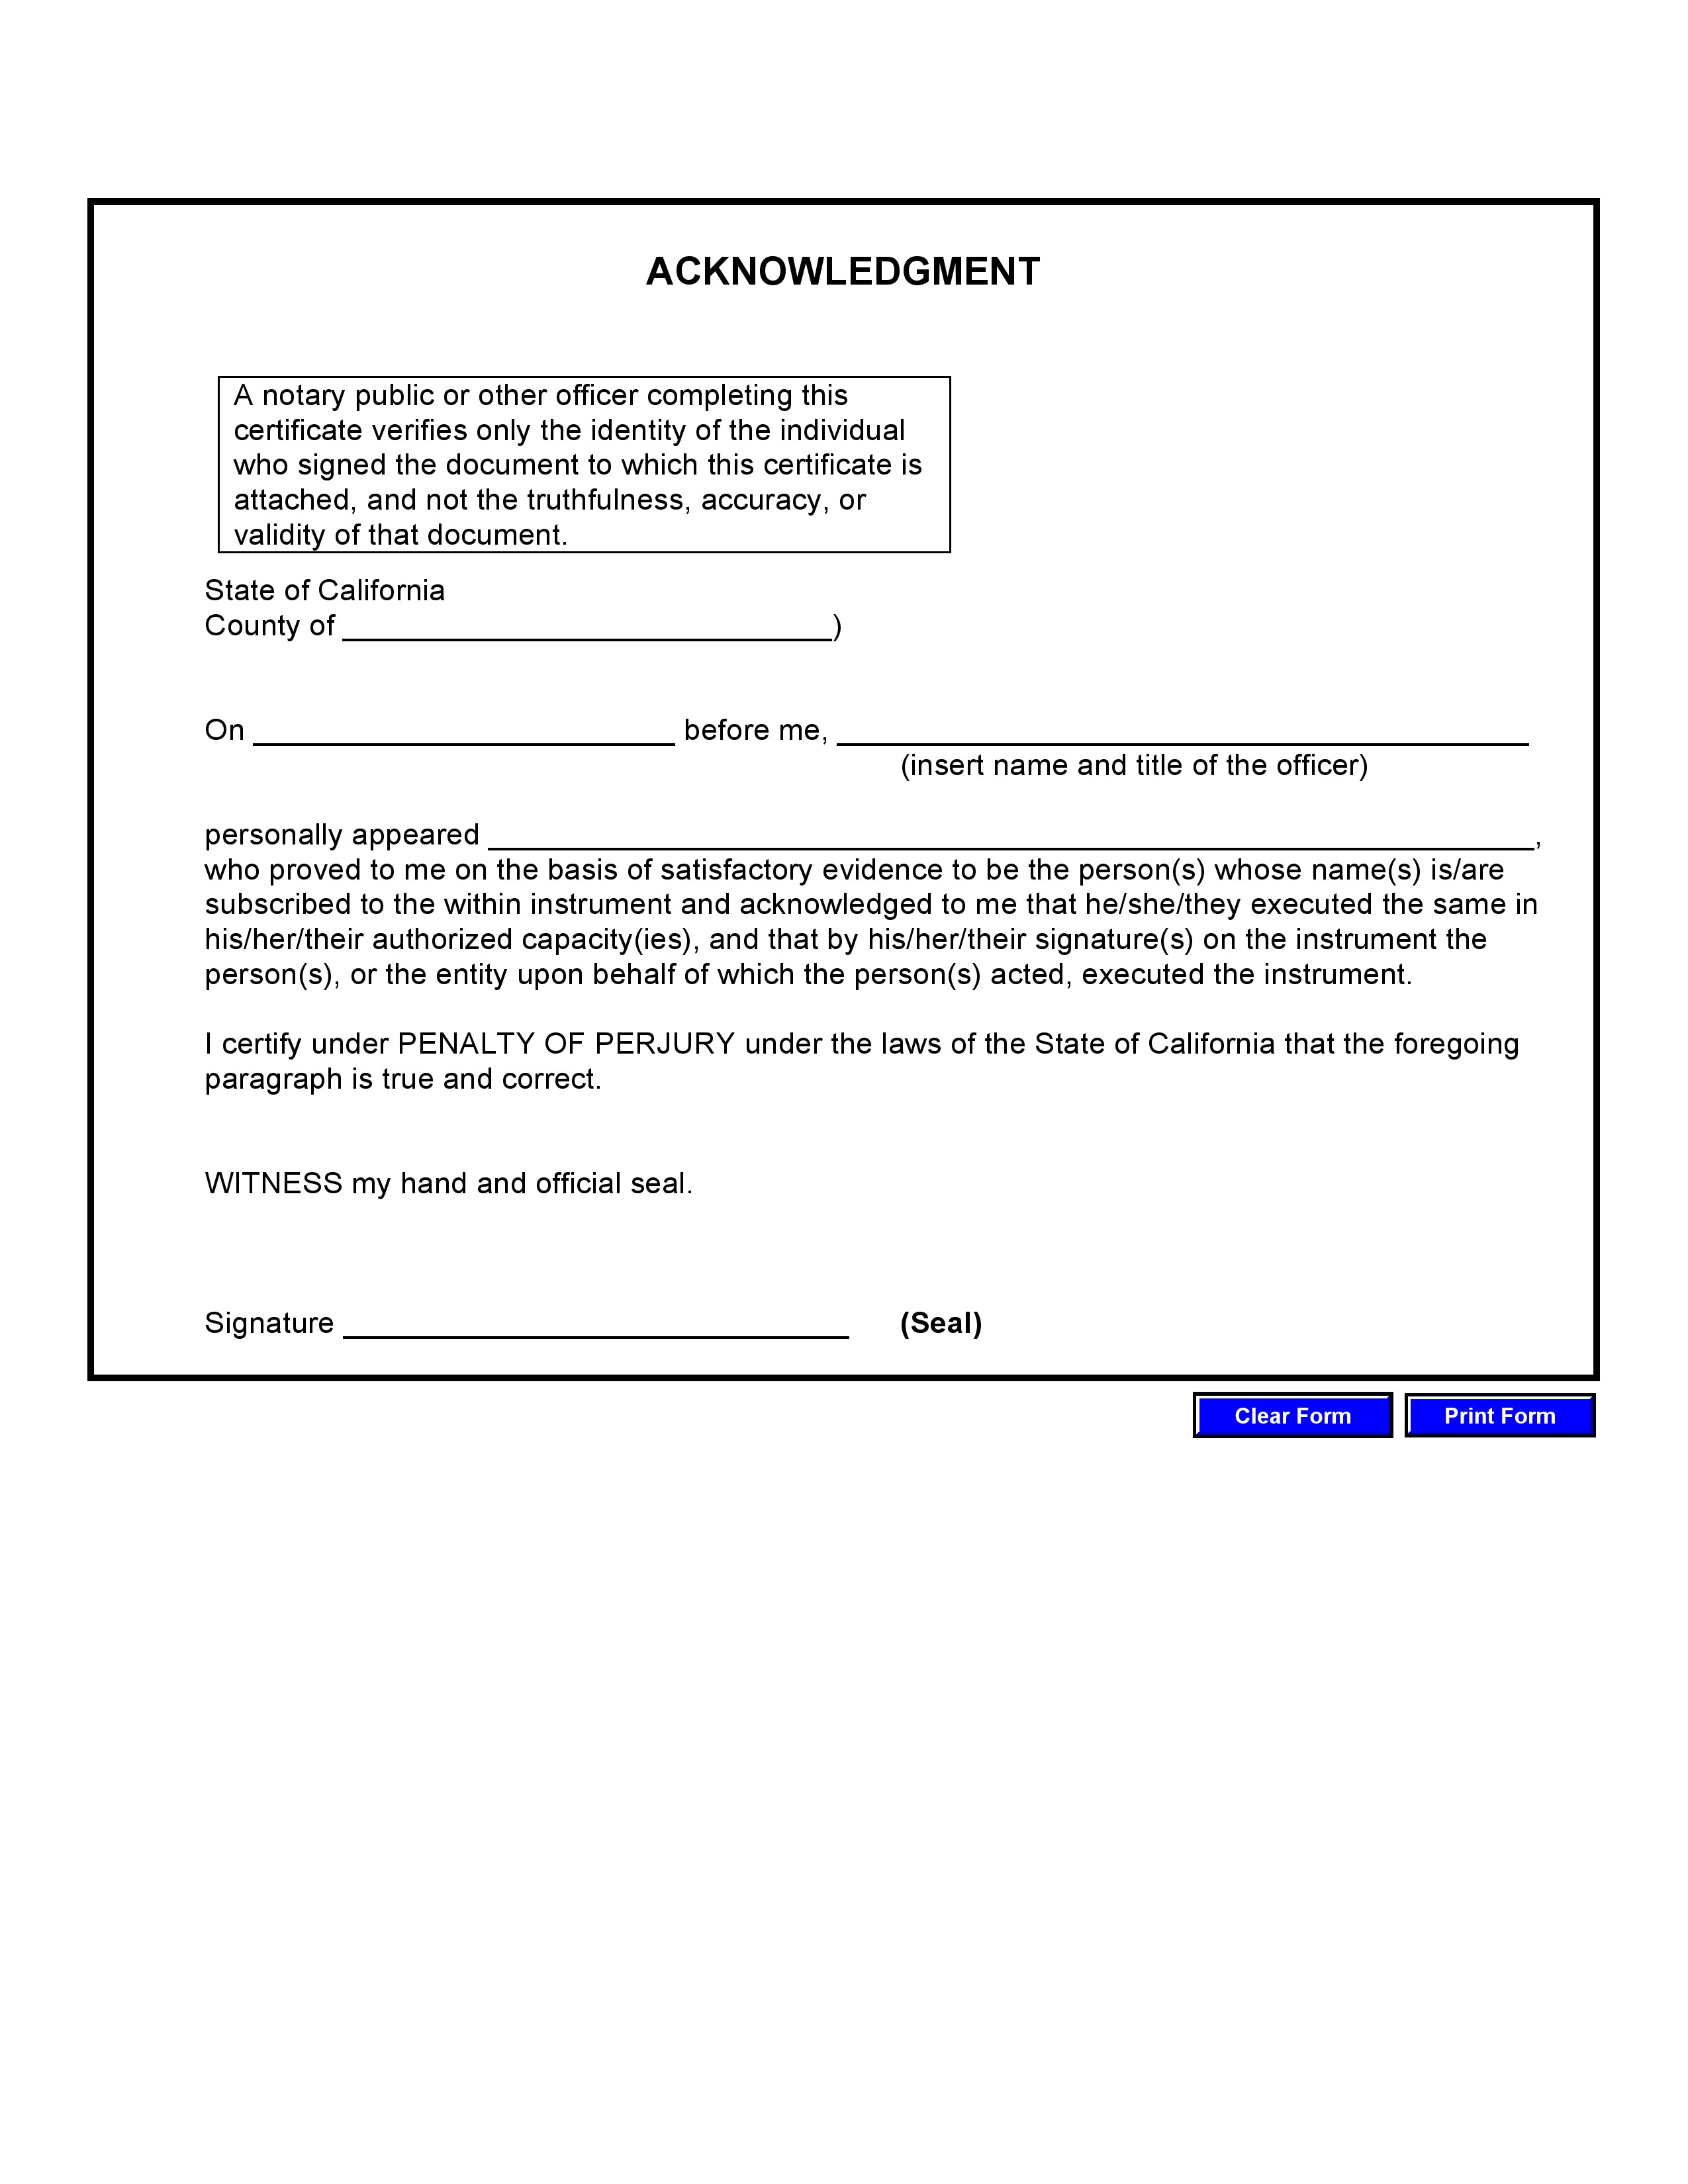 California Notary Public Acknowledgment Form